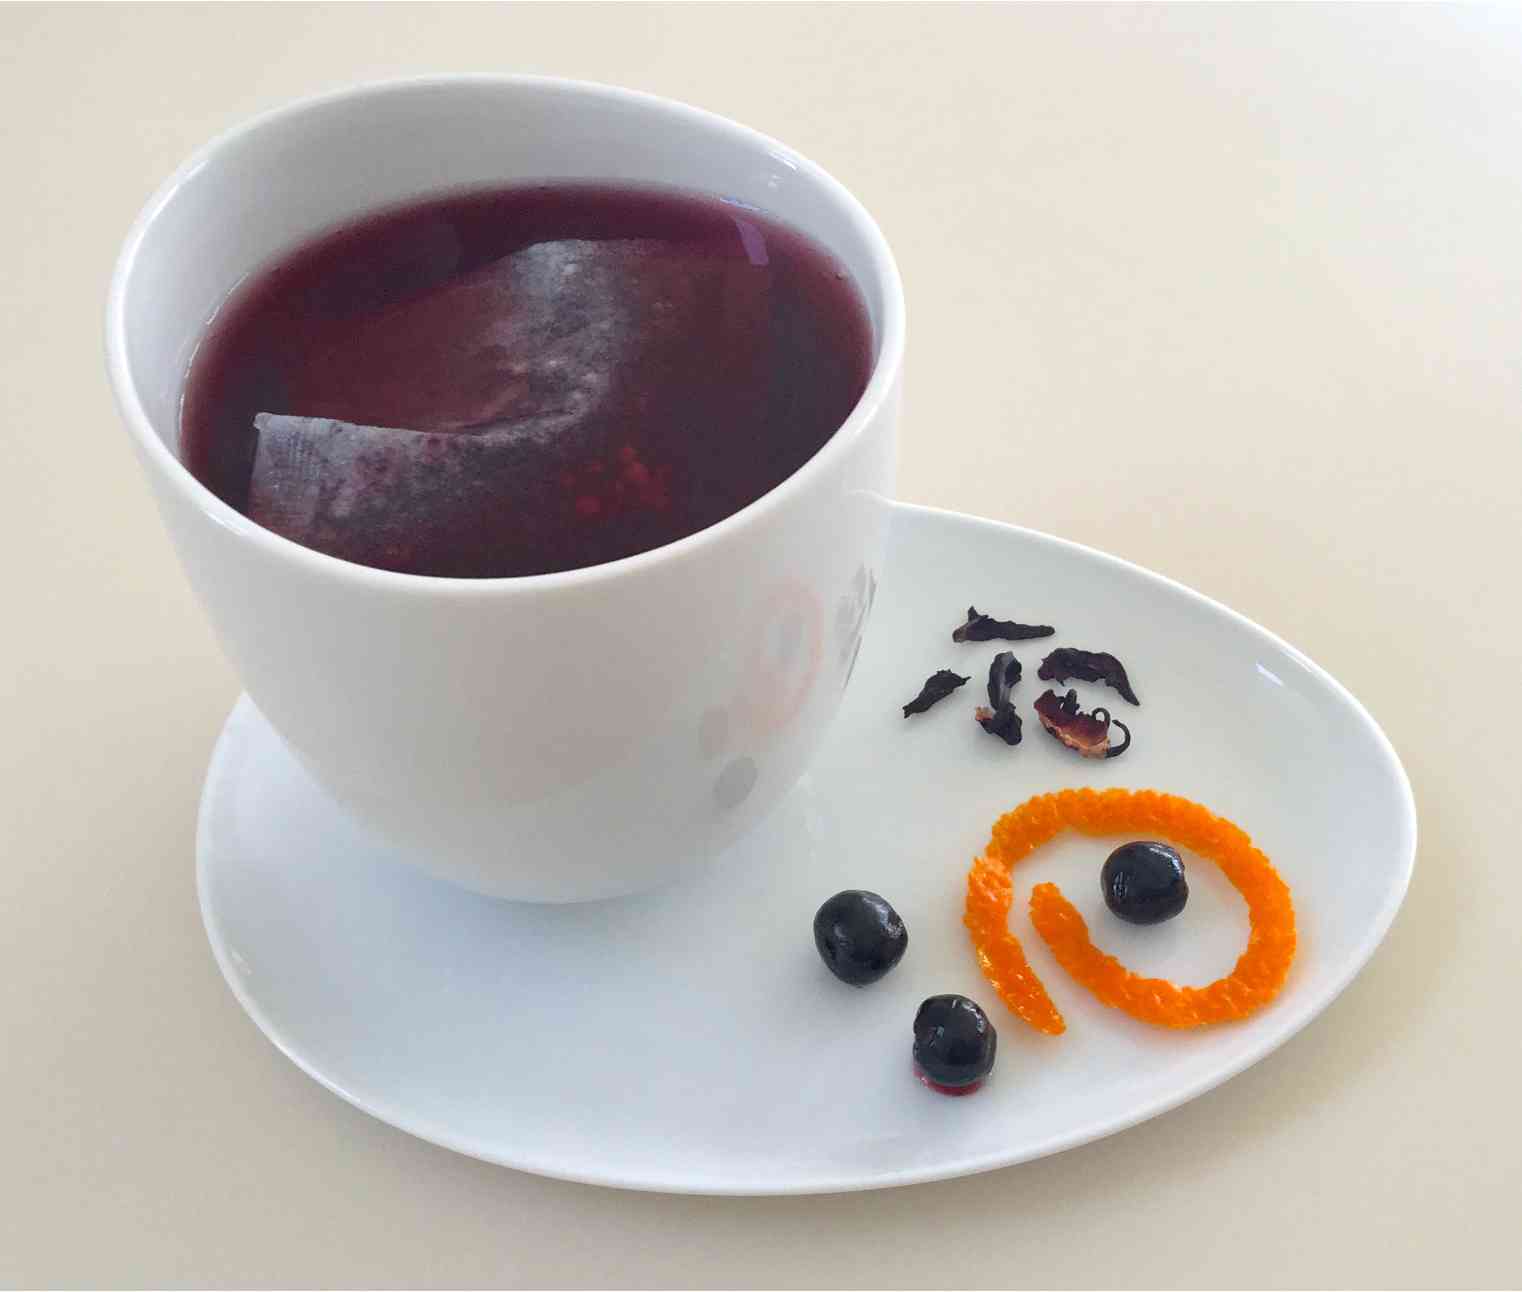 Sunny Lane Farms aronia tea showing its ingredients next to cup, photo by Peter Laundy